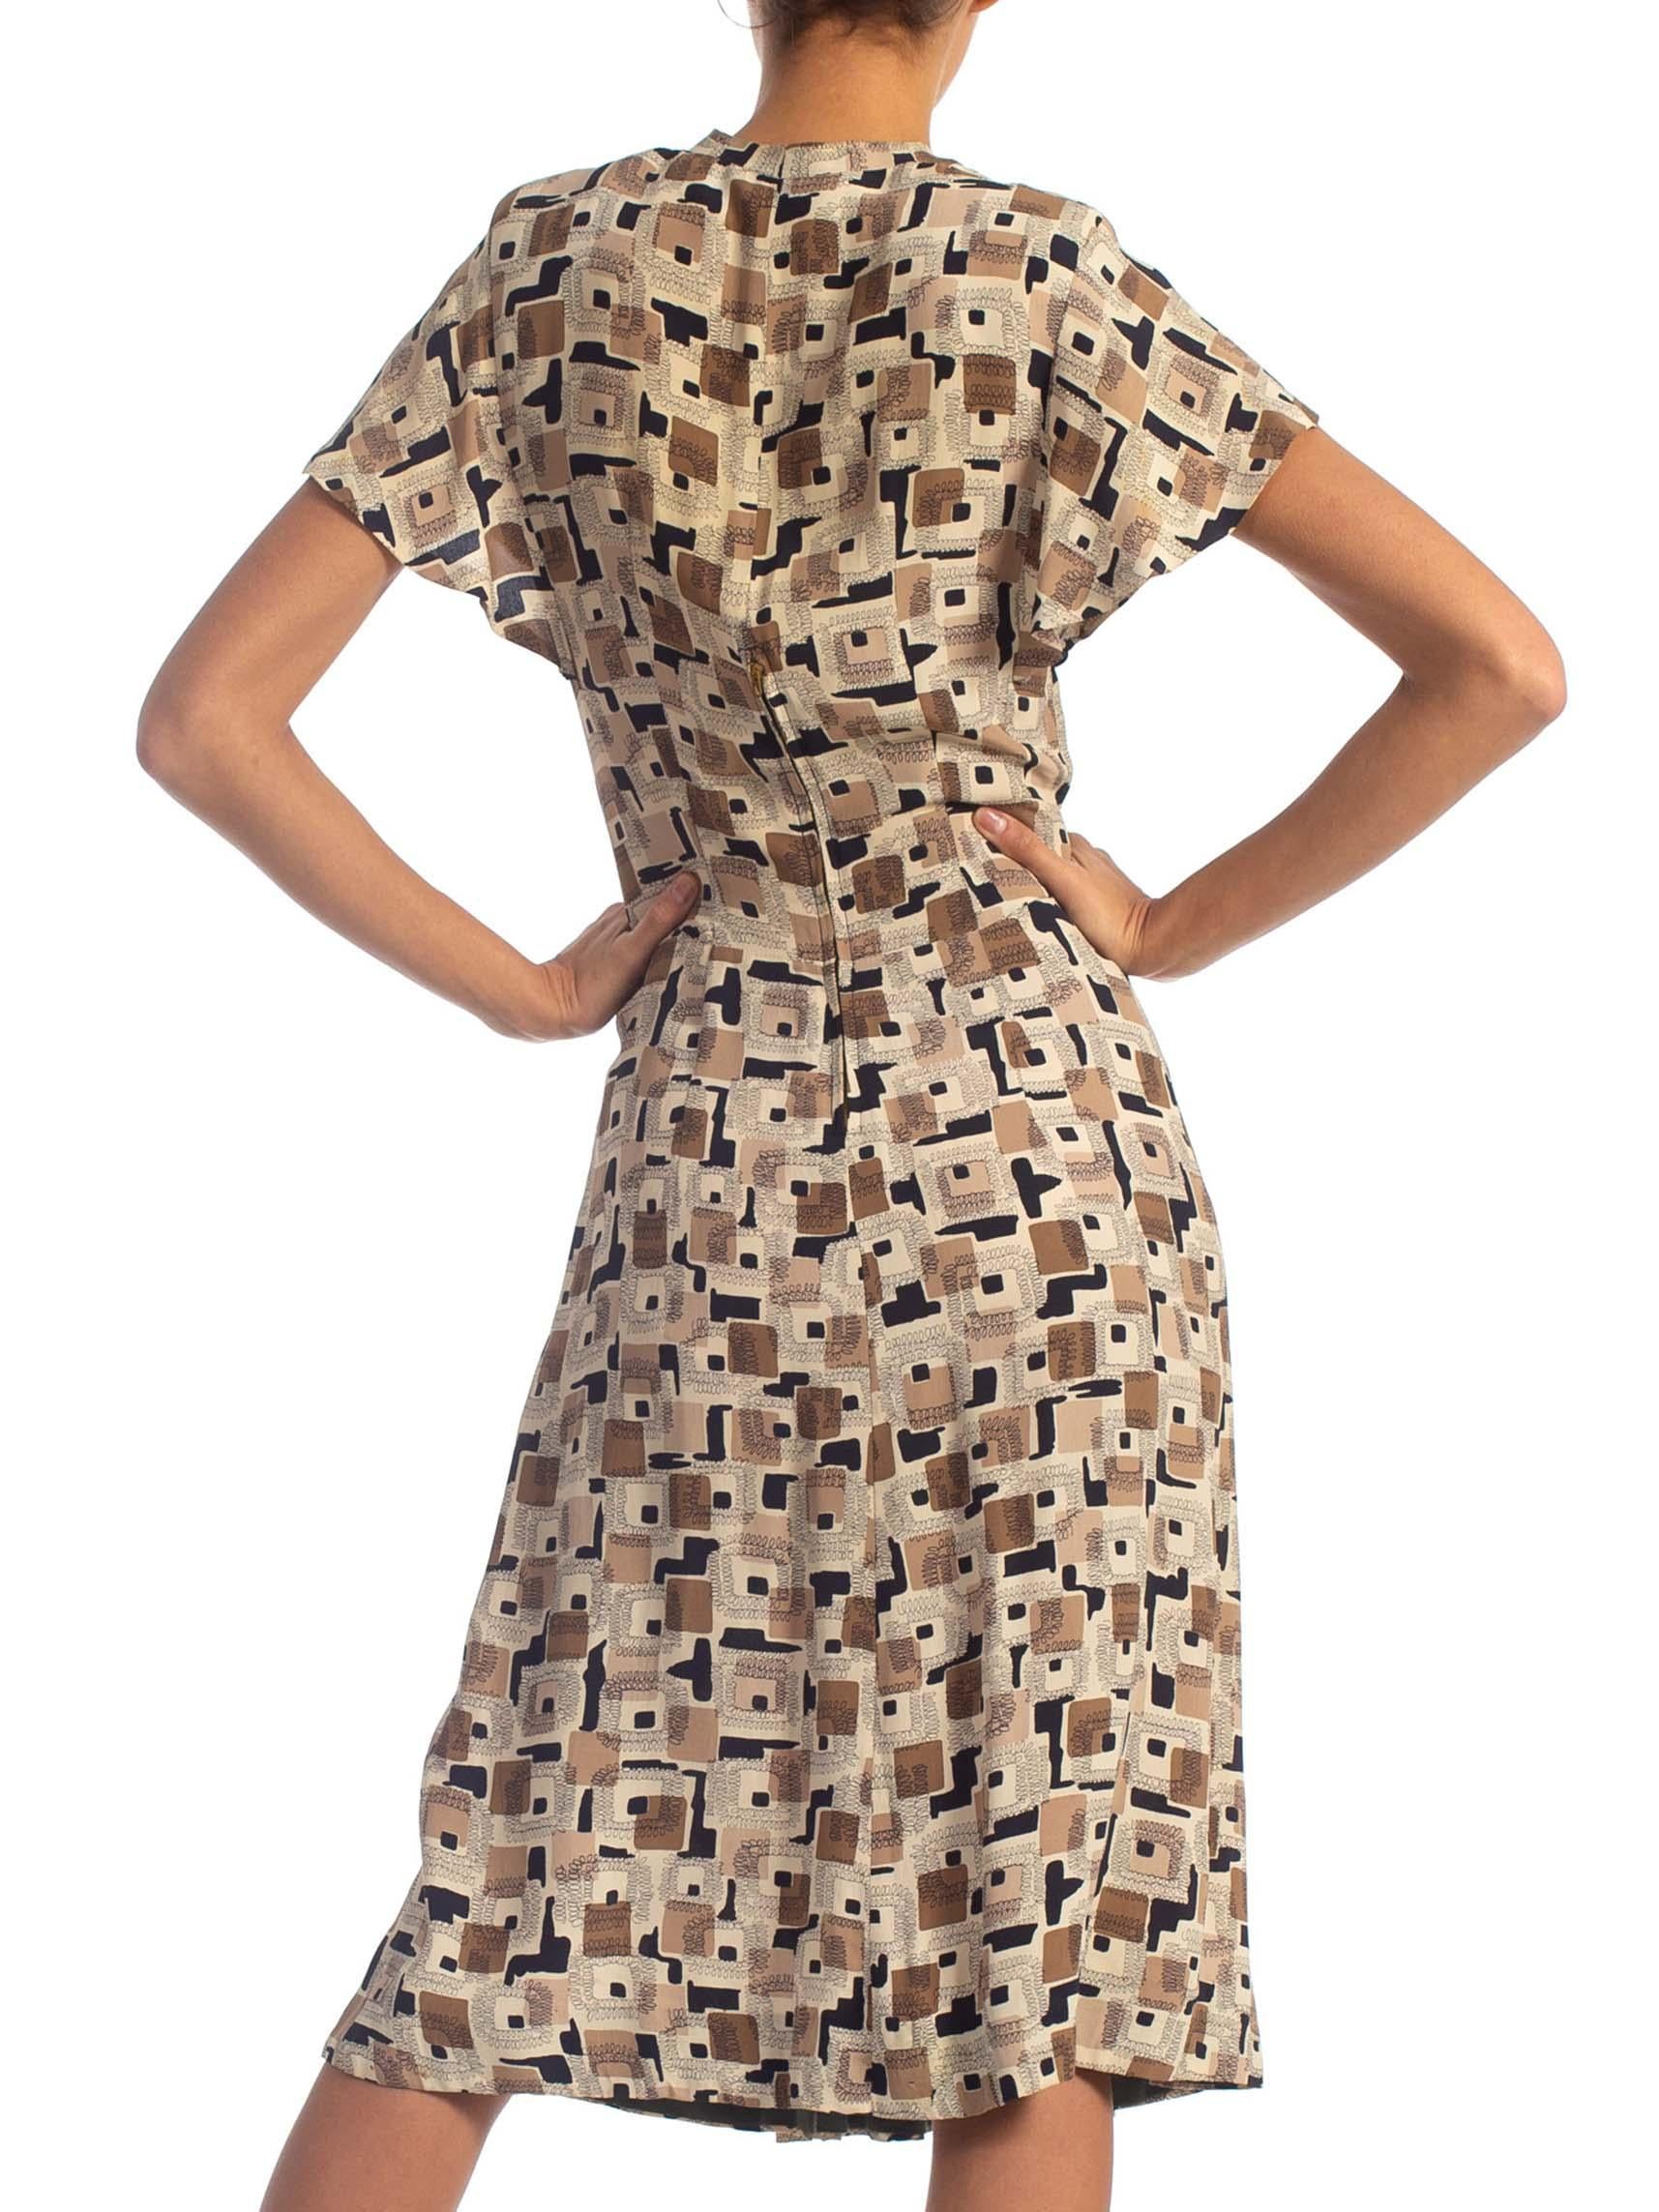 1940S Printed Rayon Crepe Dress With Bows & Pockets For Sale 4